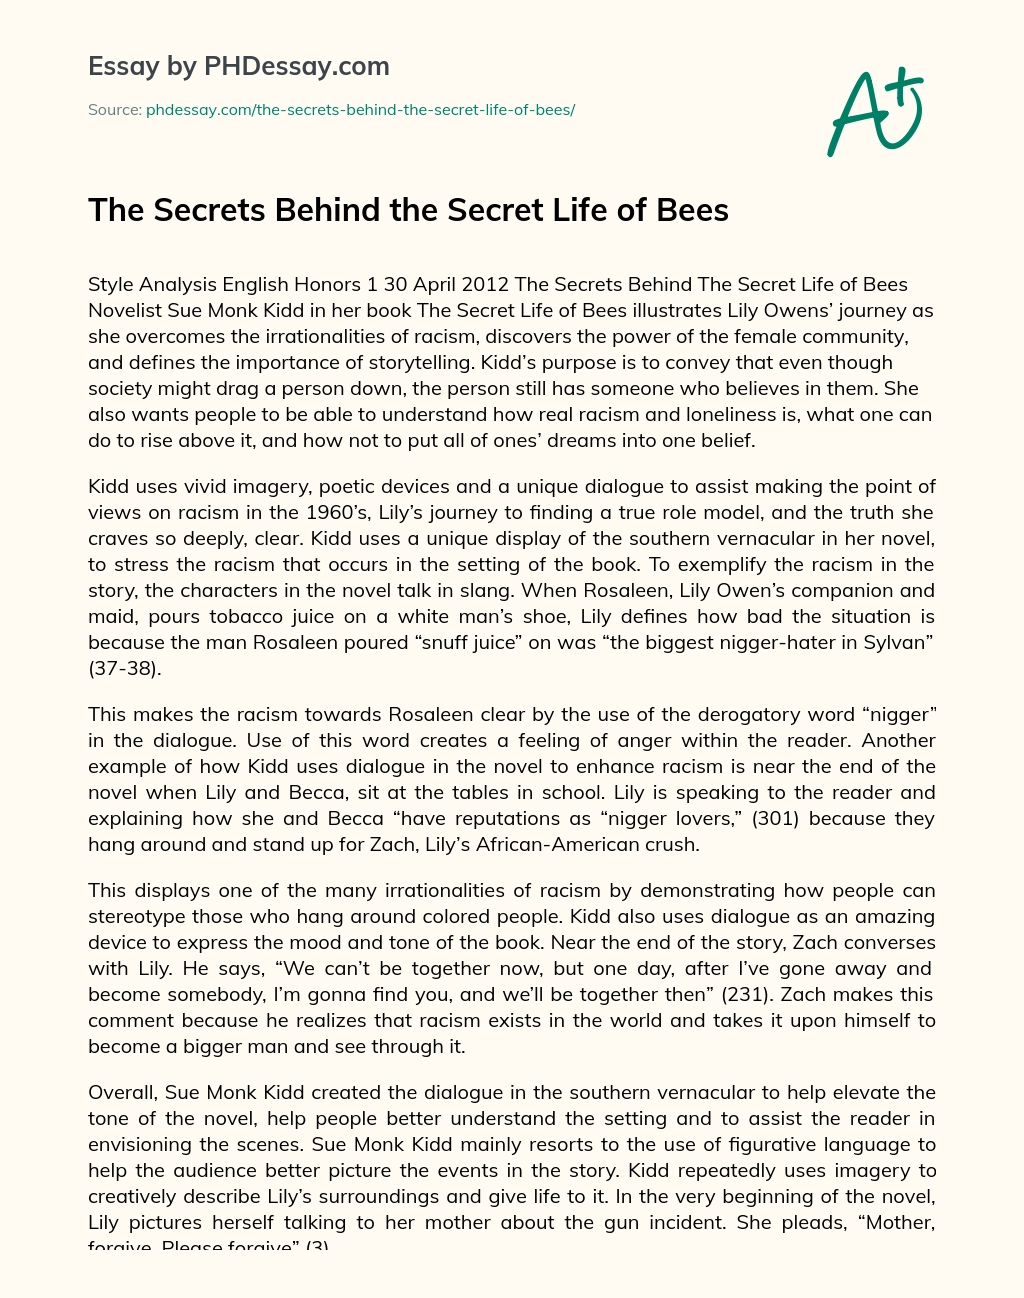 The Secrets Behind the Secret Life of Bees essay